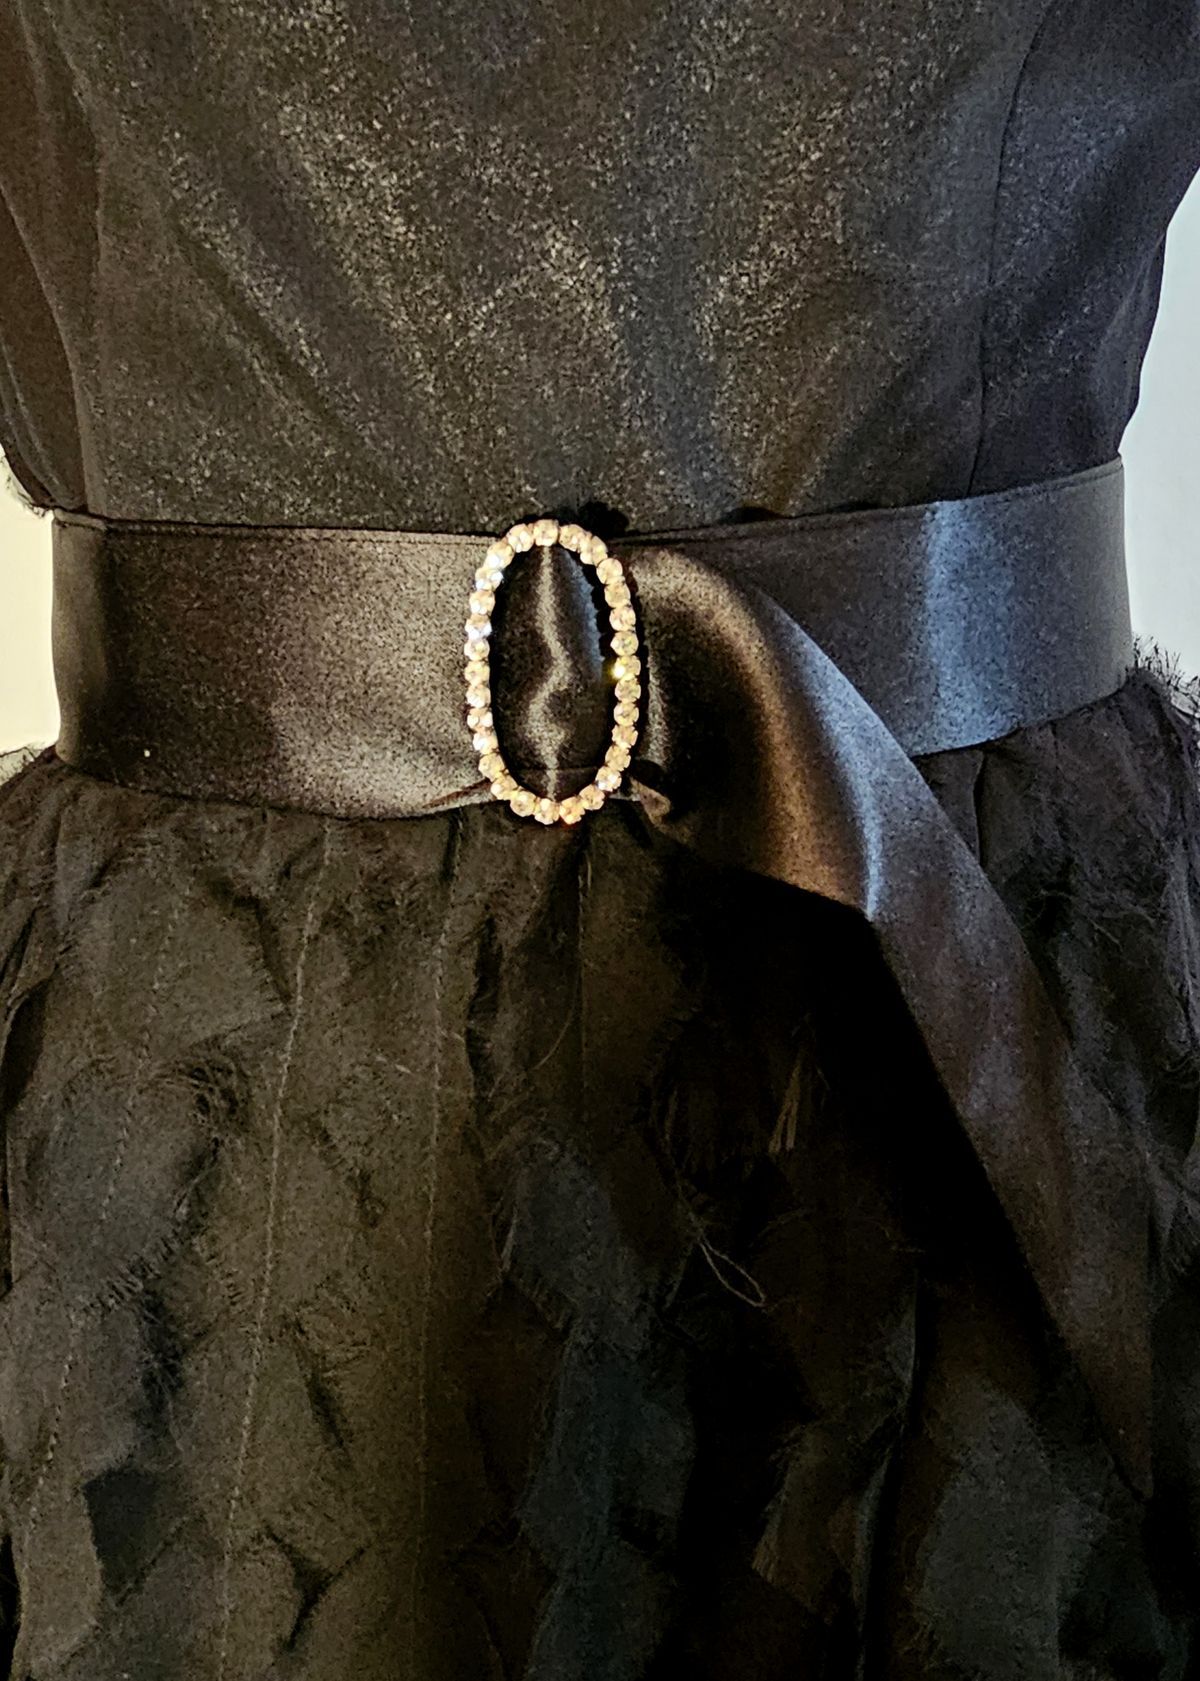 White House Black Market Size 12 Homecoming Strapless Black Cocktail Dress on Queenly